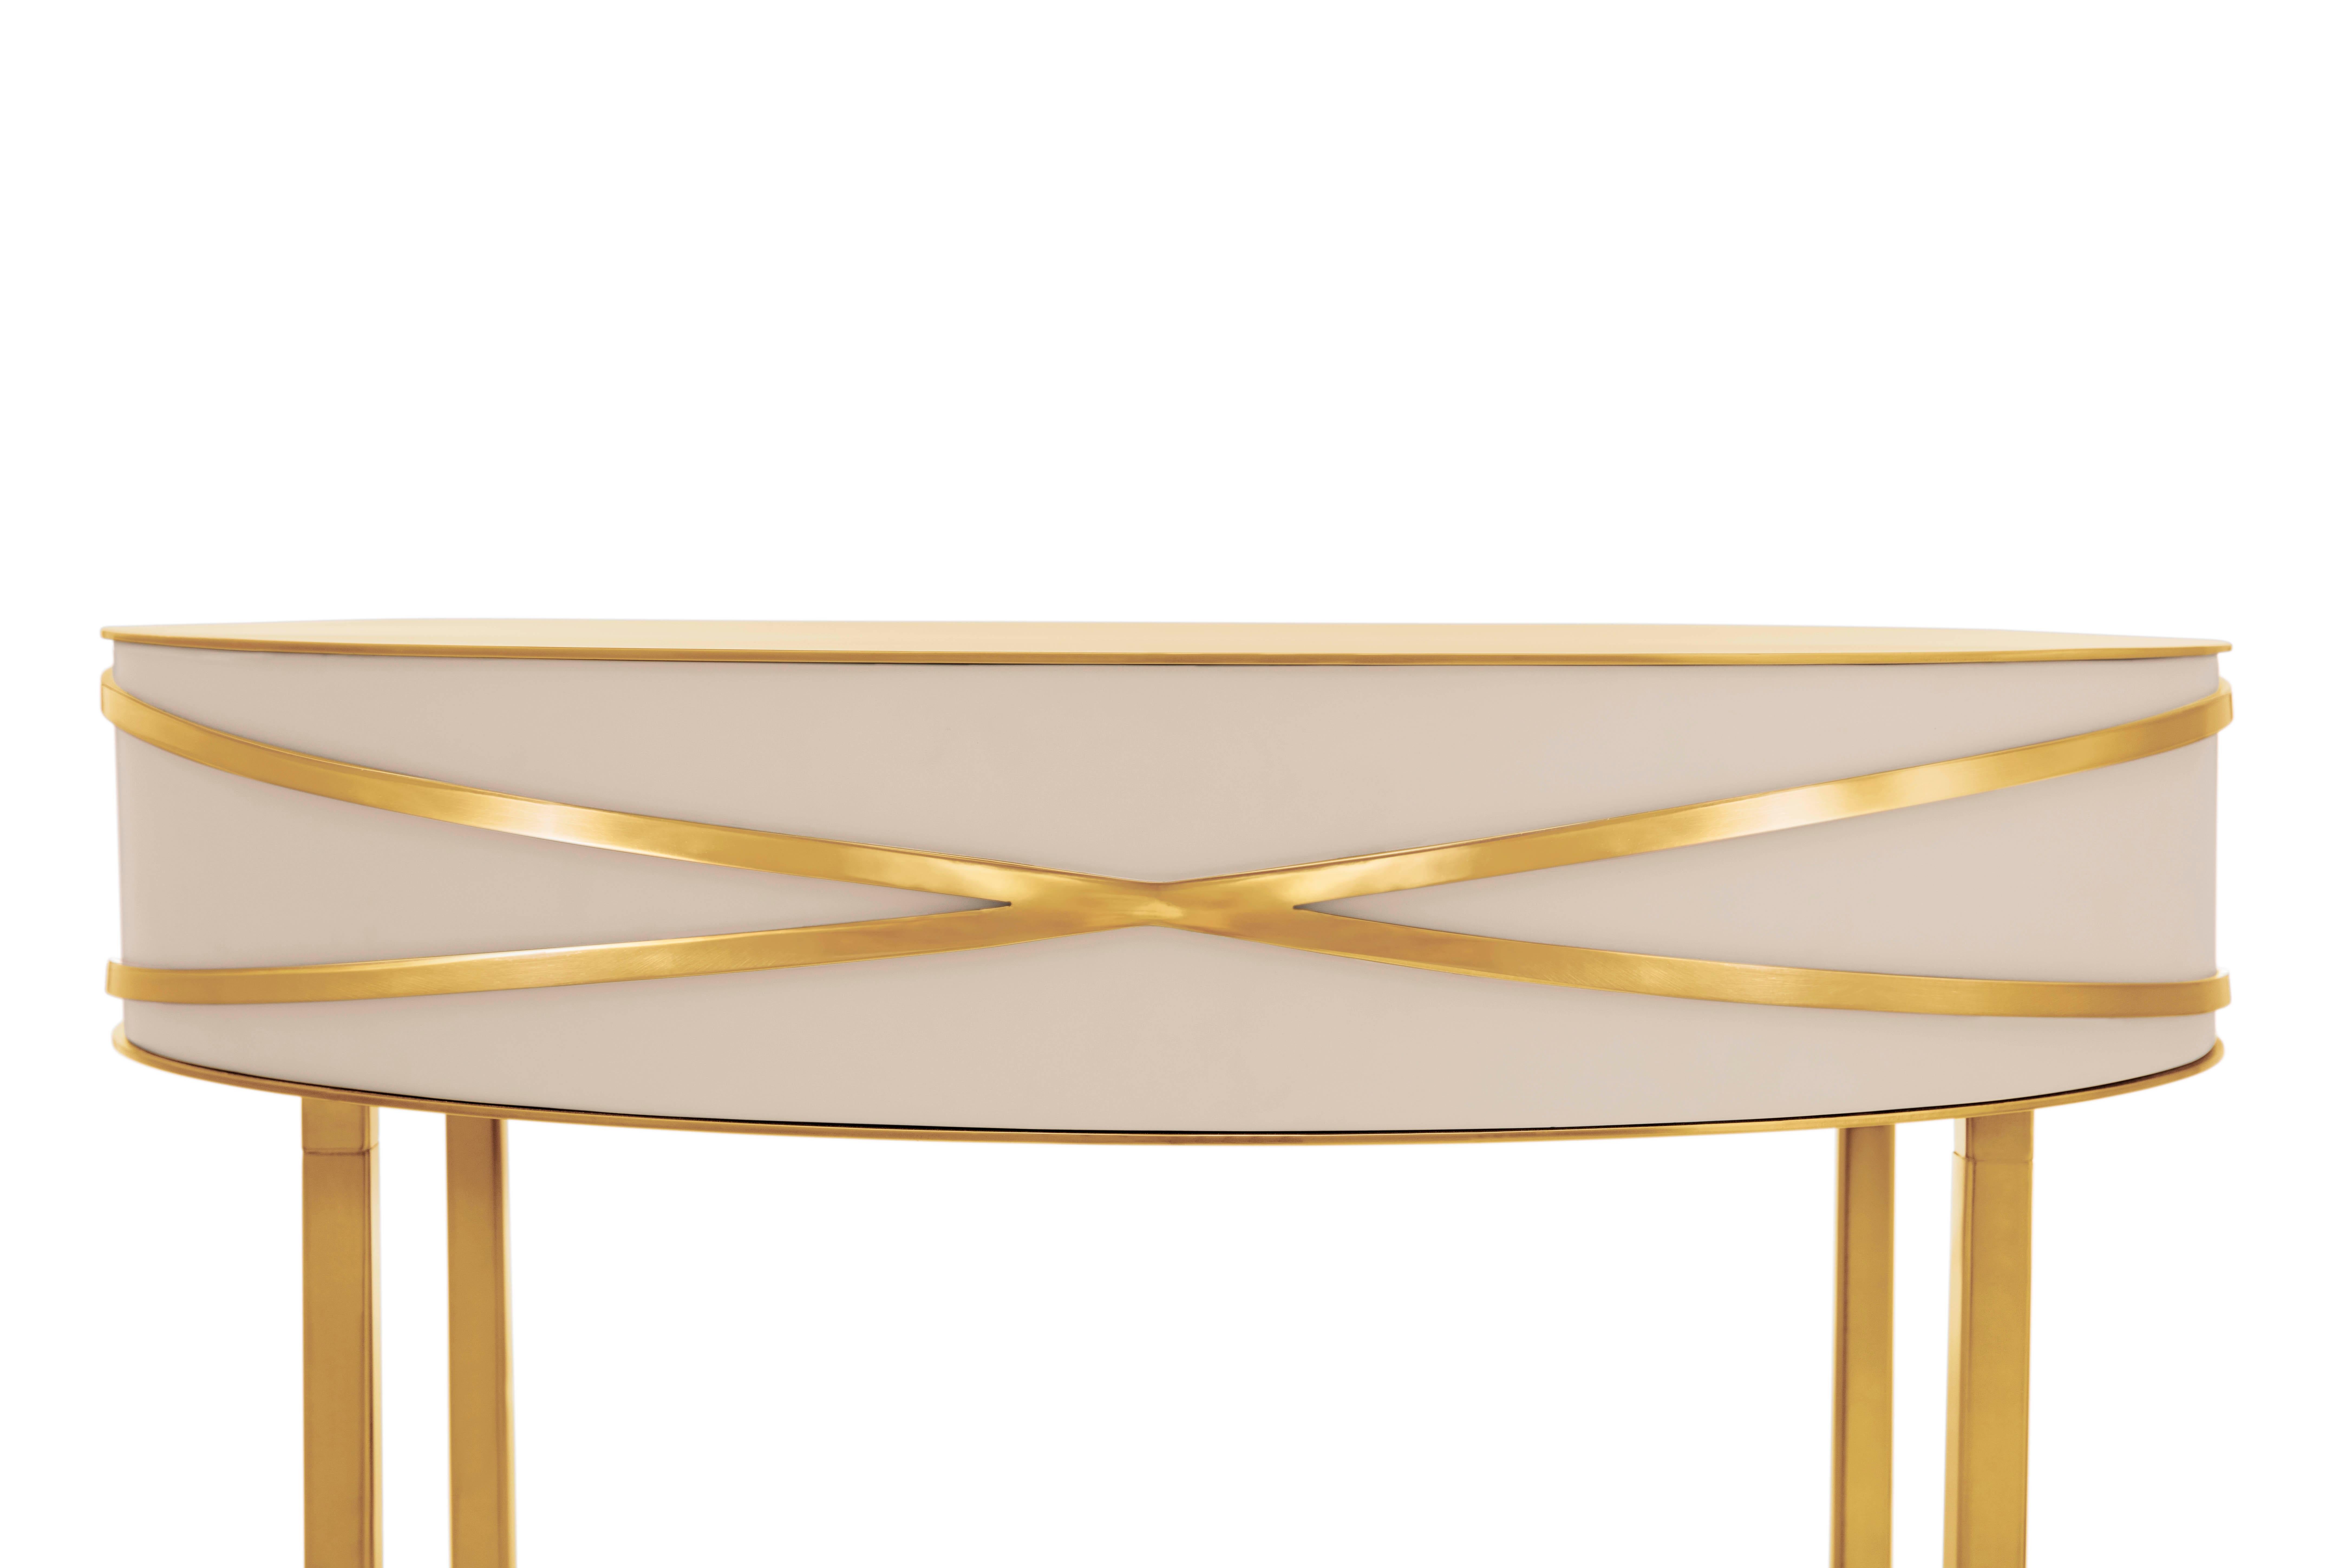 Stella Gray Console or Bedside Table with Gold Trims by Nika Zupanc is a chic gray table with a drawer, and gold metal trims.

Nika Zupanc, a strikingly renowned Slovenian designer, never shies away from redefining the status quo of design, moving